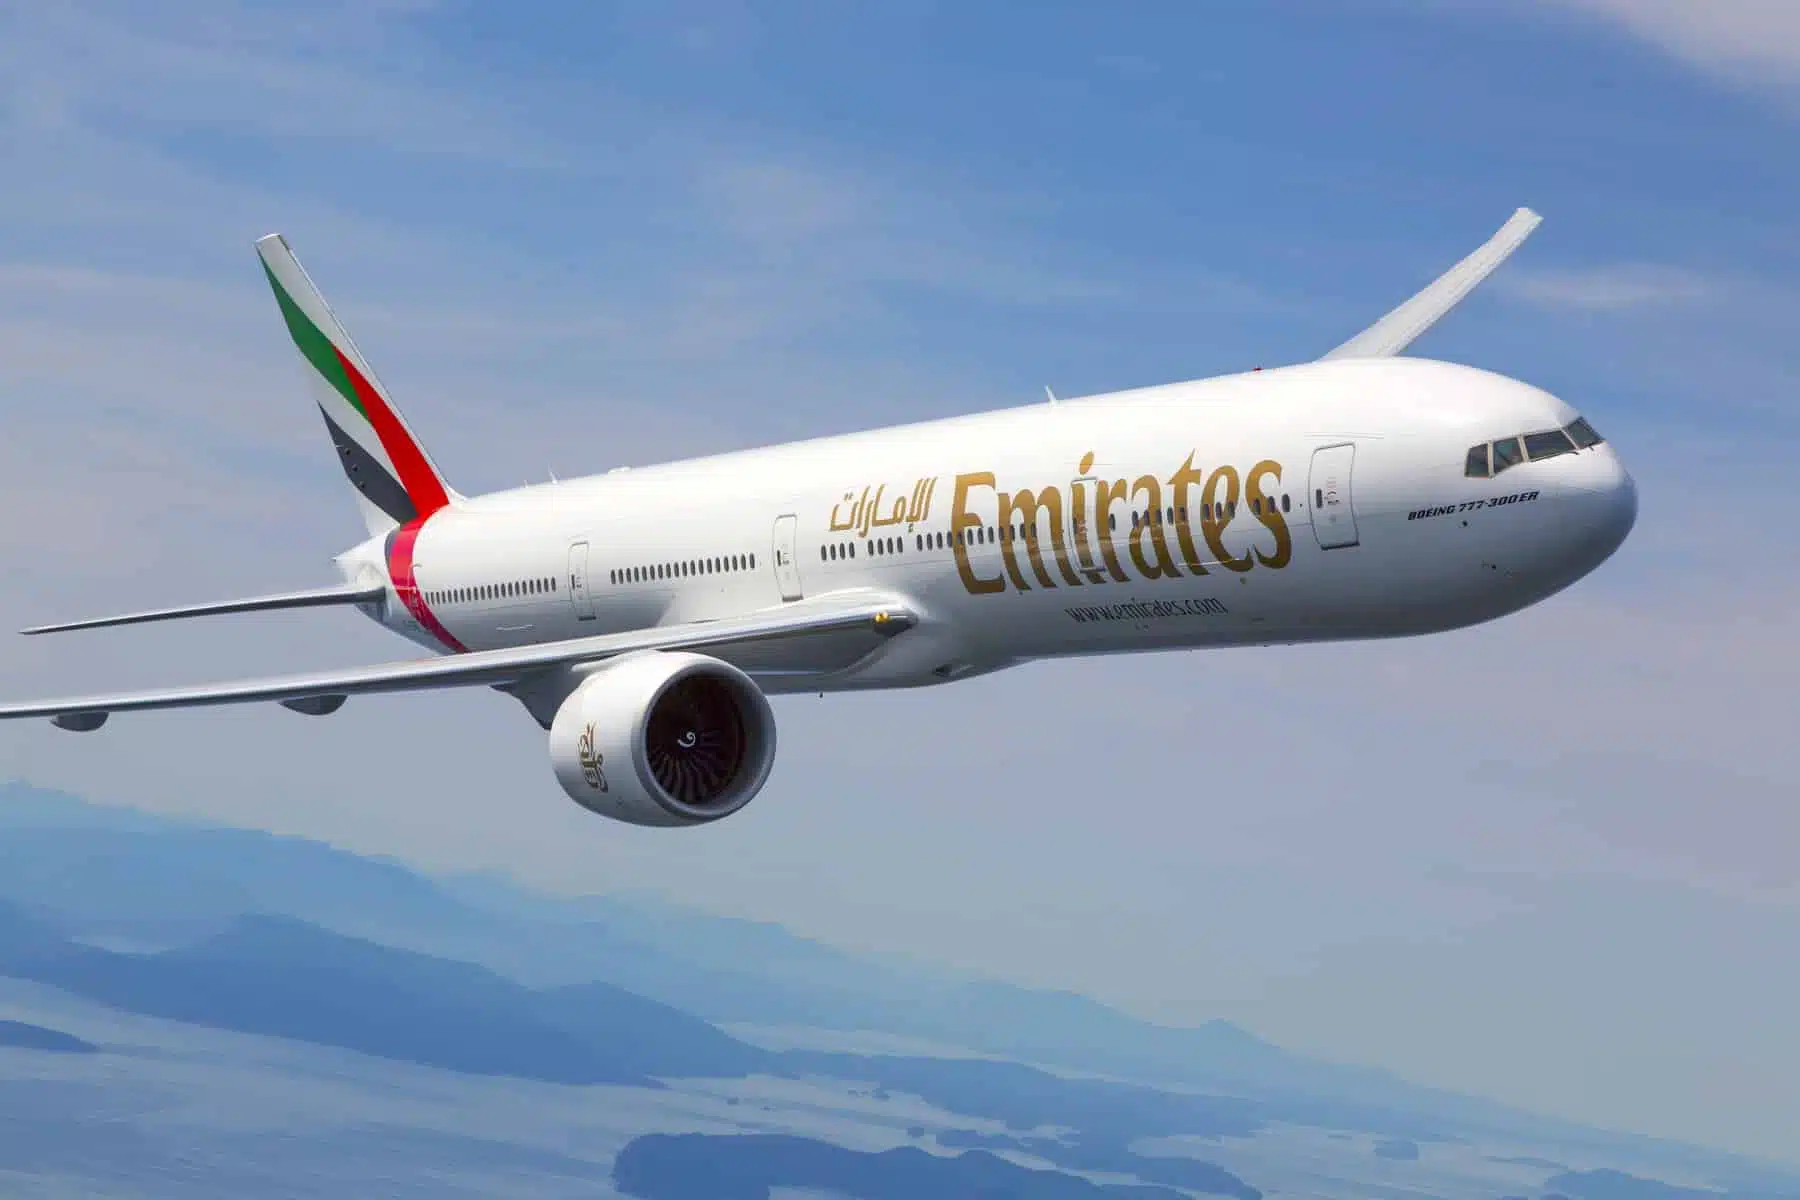 Emirates reaffirms commitment to South Africa with expanded flight schedules across its three gateways